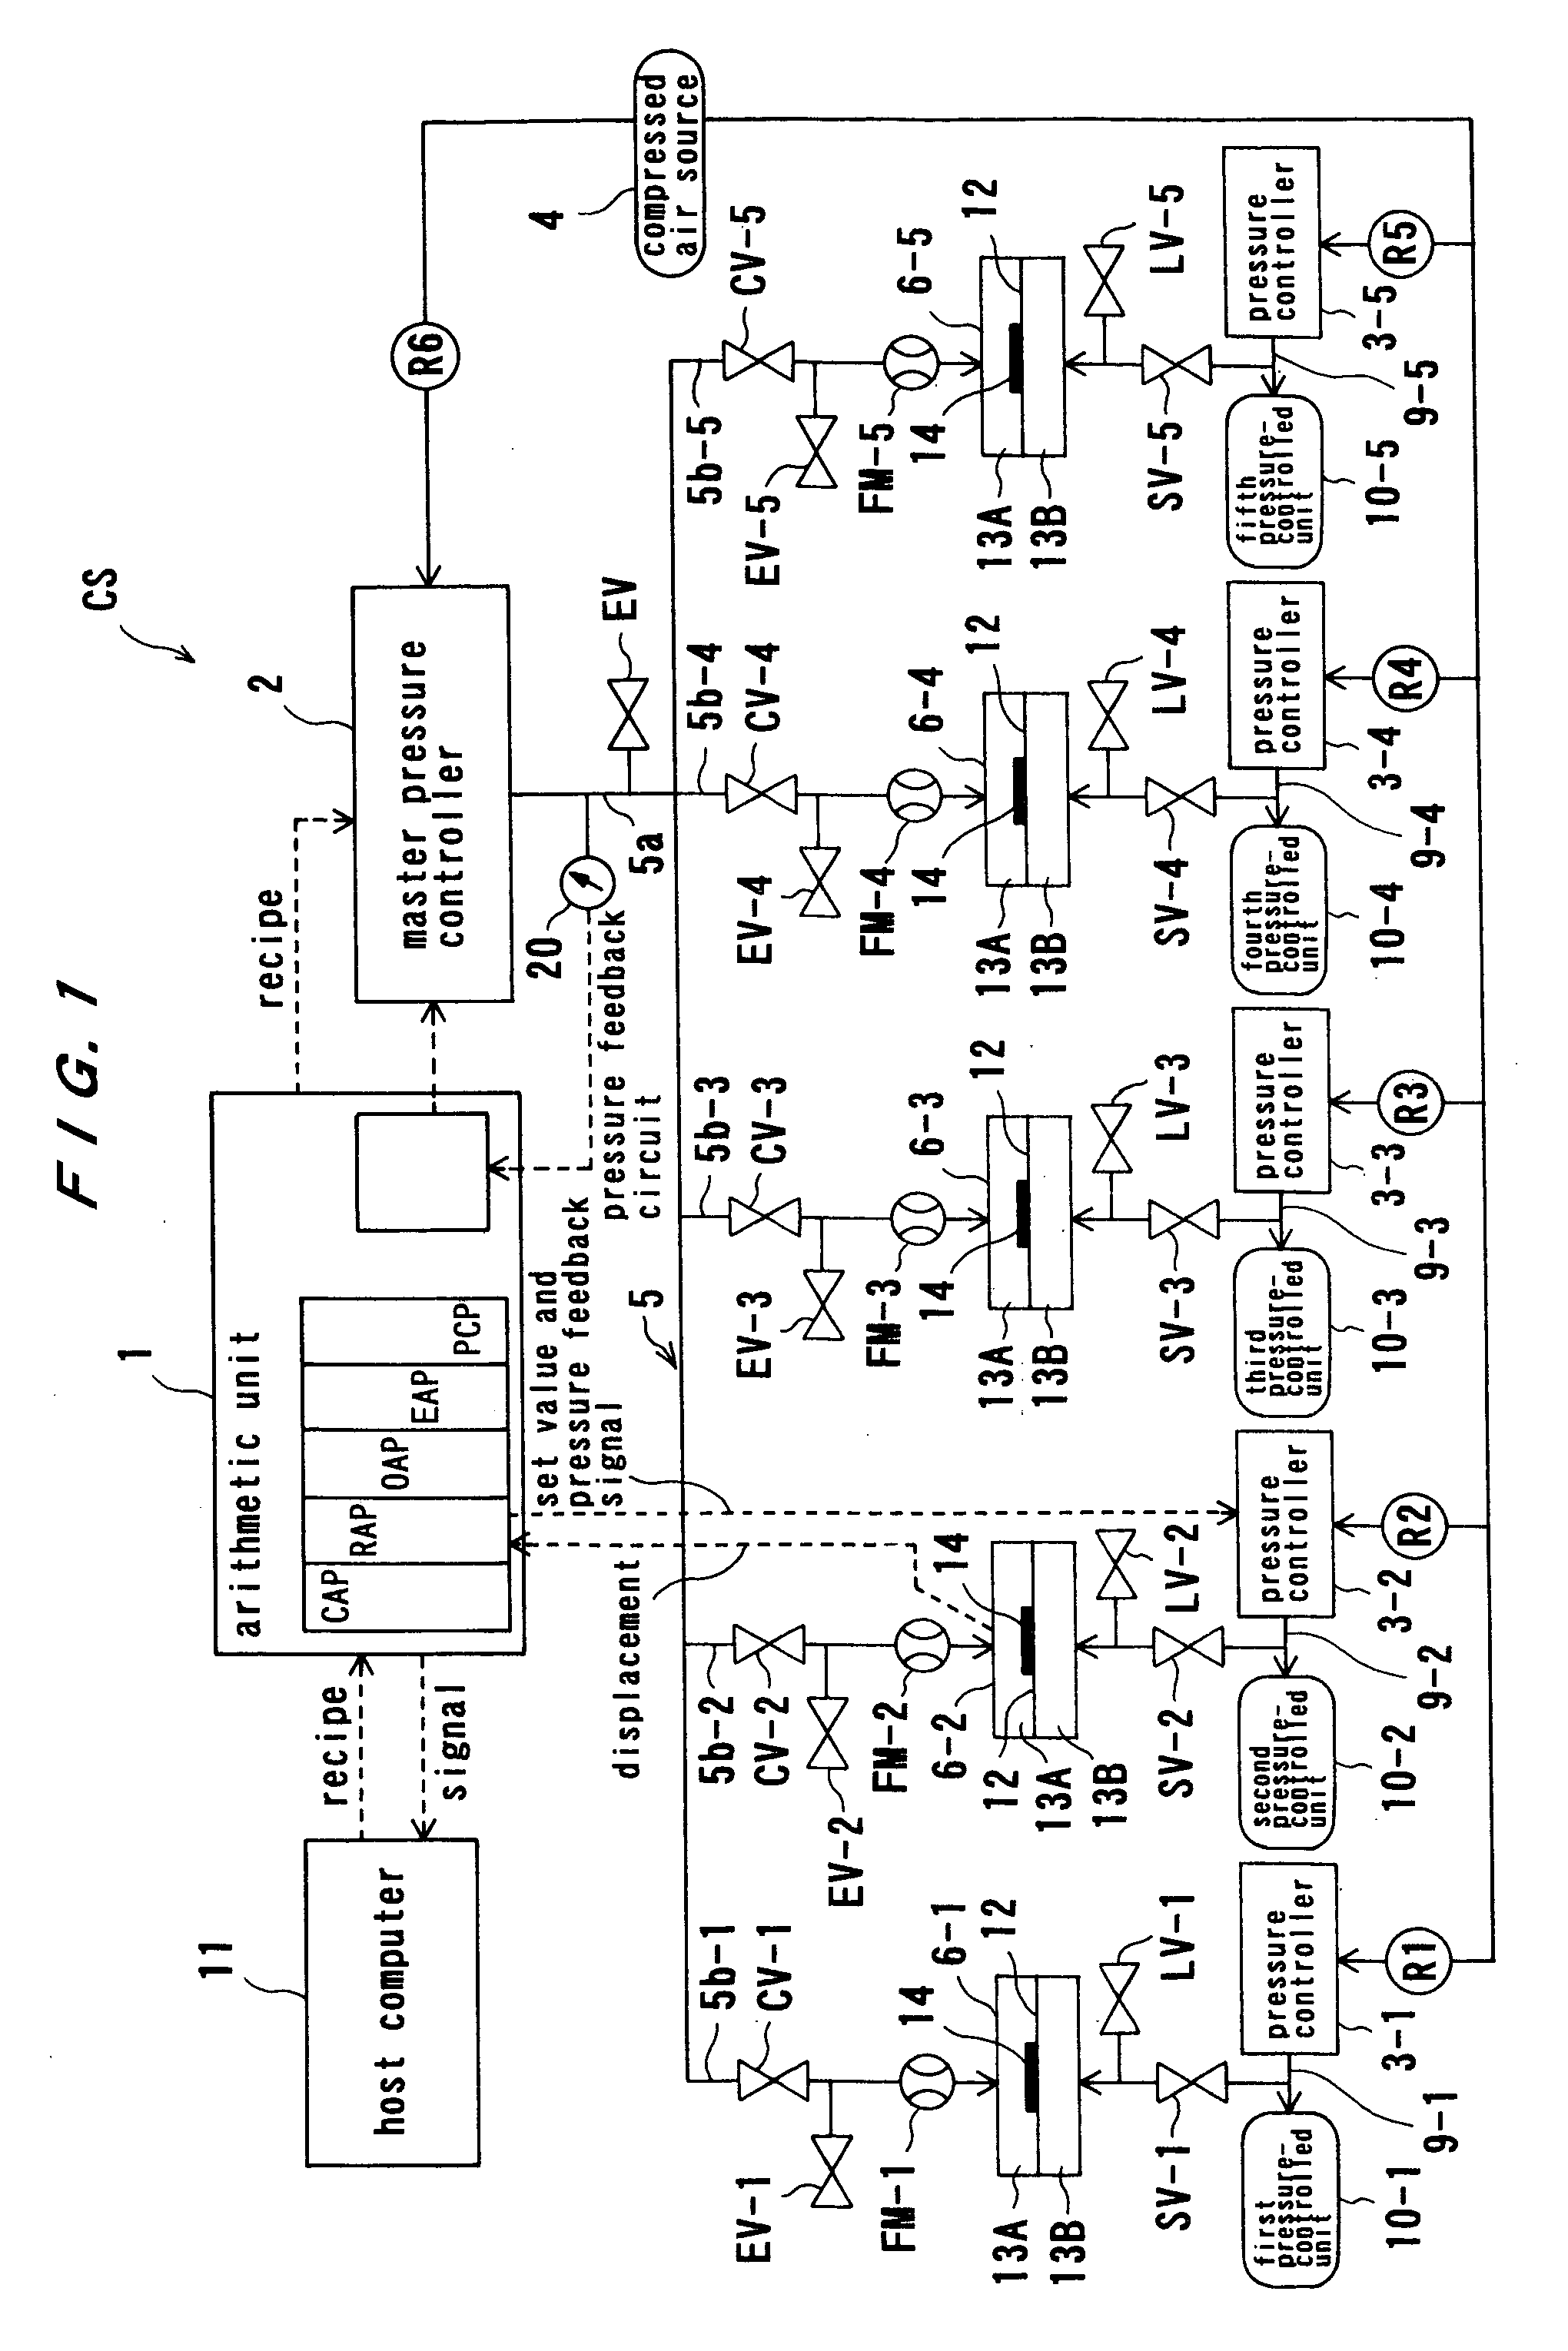 Pressure control system and polishing apparatus